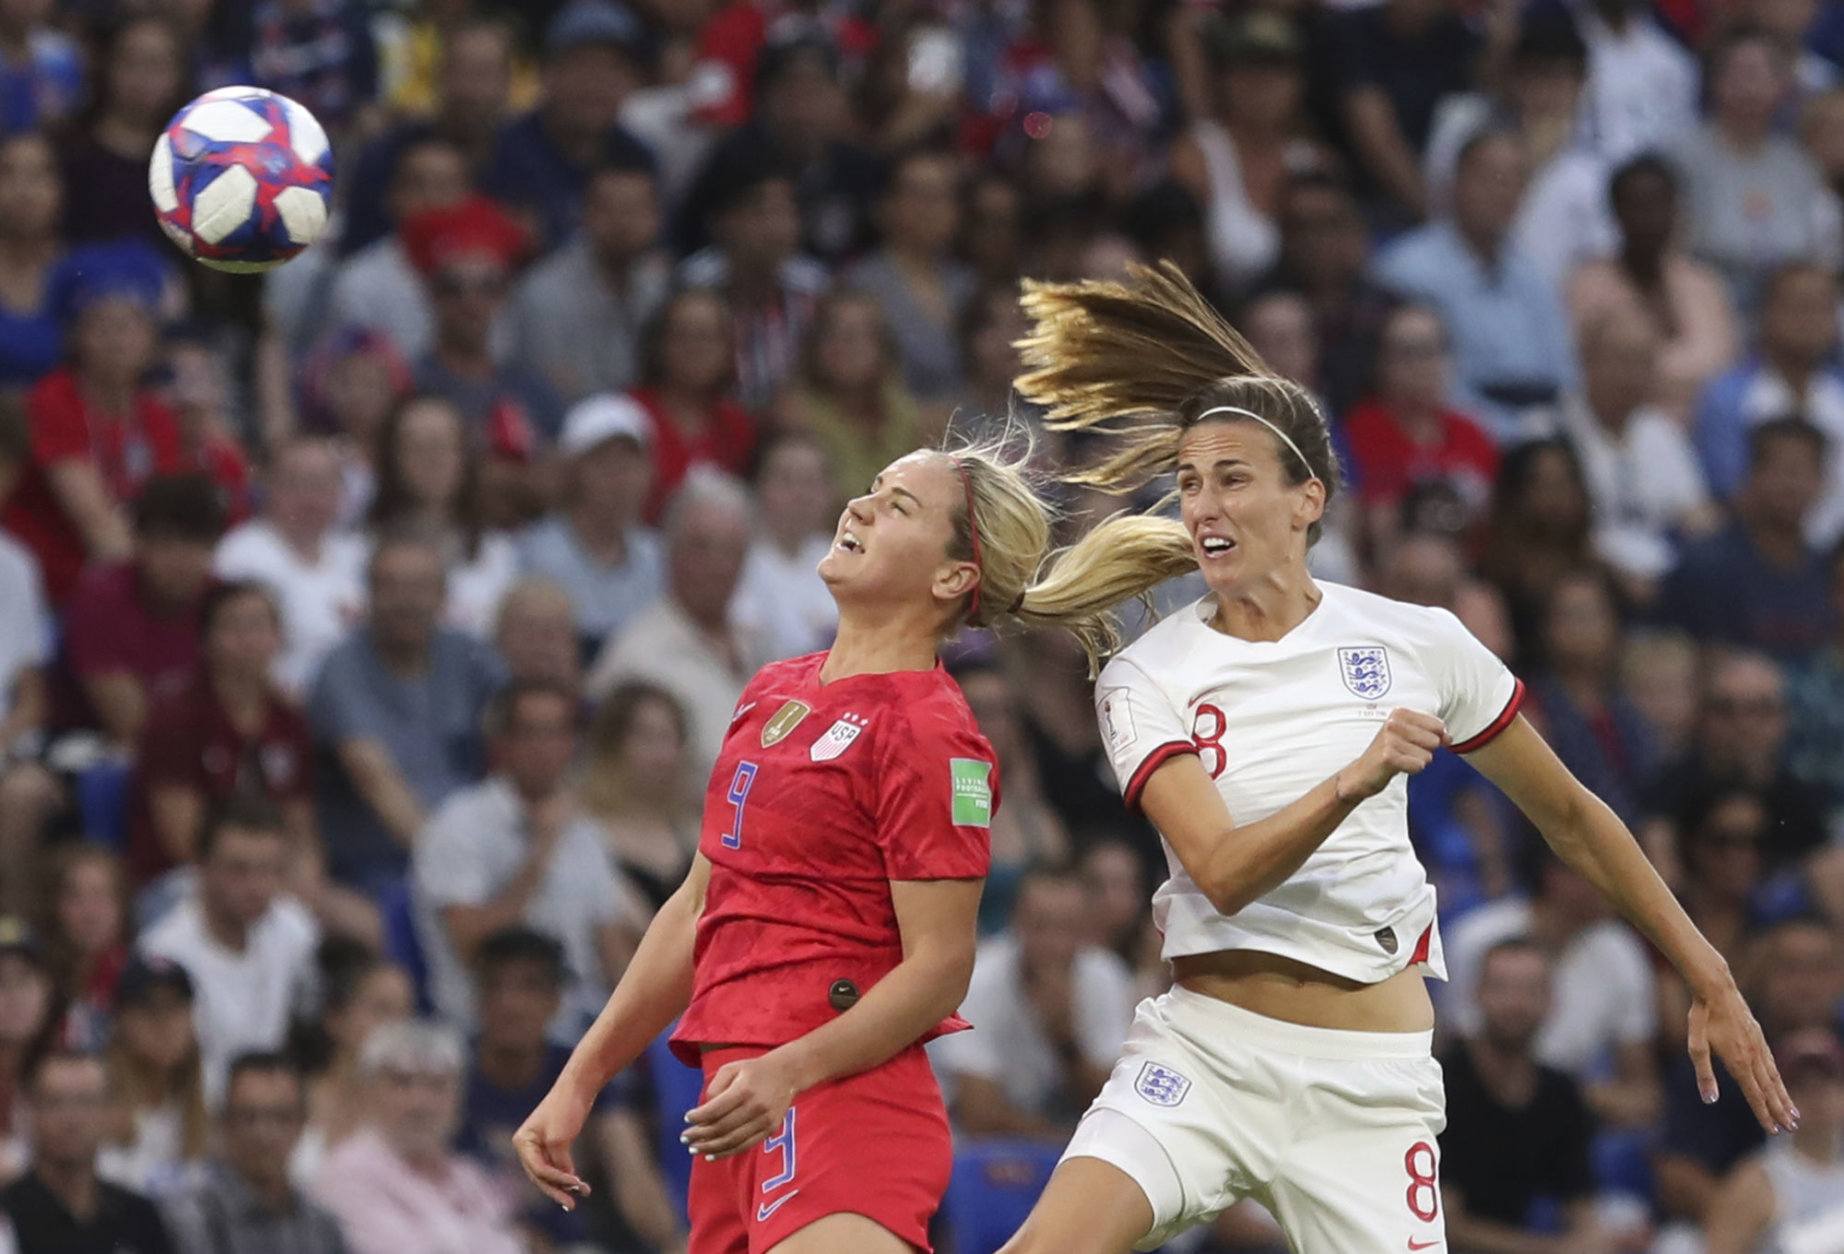 United States' Lindsey Horan, left, and England's Jill Scott challenge for the ball during the Women's World Cup semifinal soccer match between England and the United States, at the Stade de Lyon outside Lyon, France, Tuesday, July 2, 2019. (AP Photo/Laurent Cipriani)